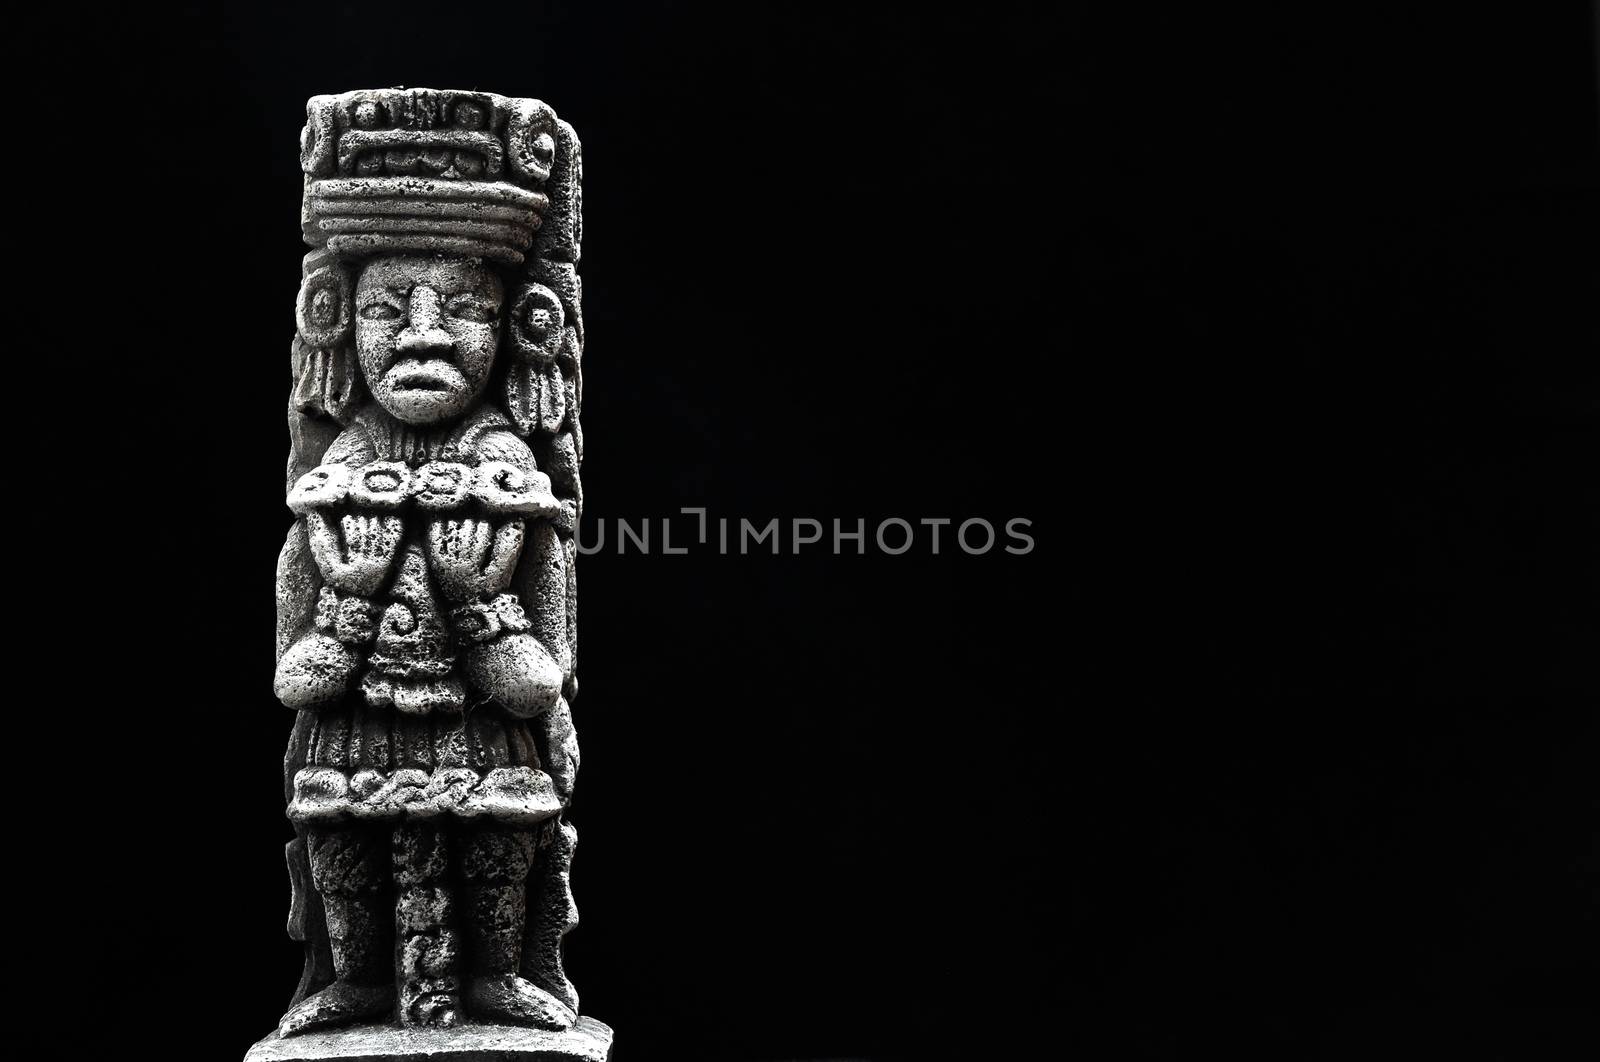 One Ancient Mayan Statue on a Black Background